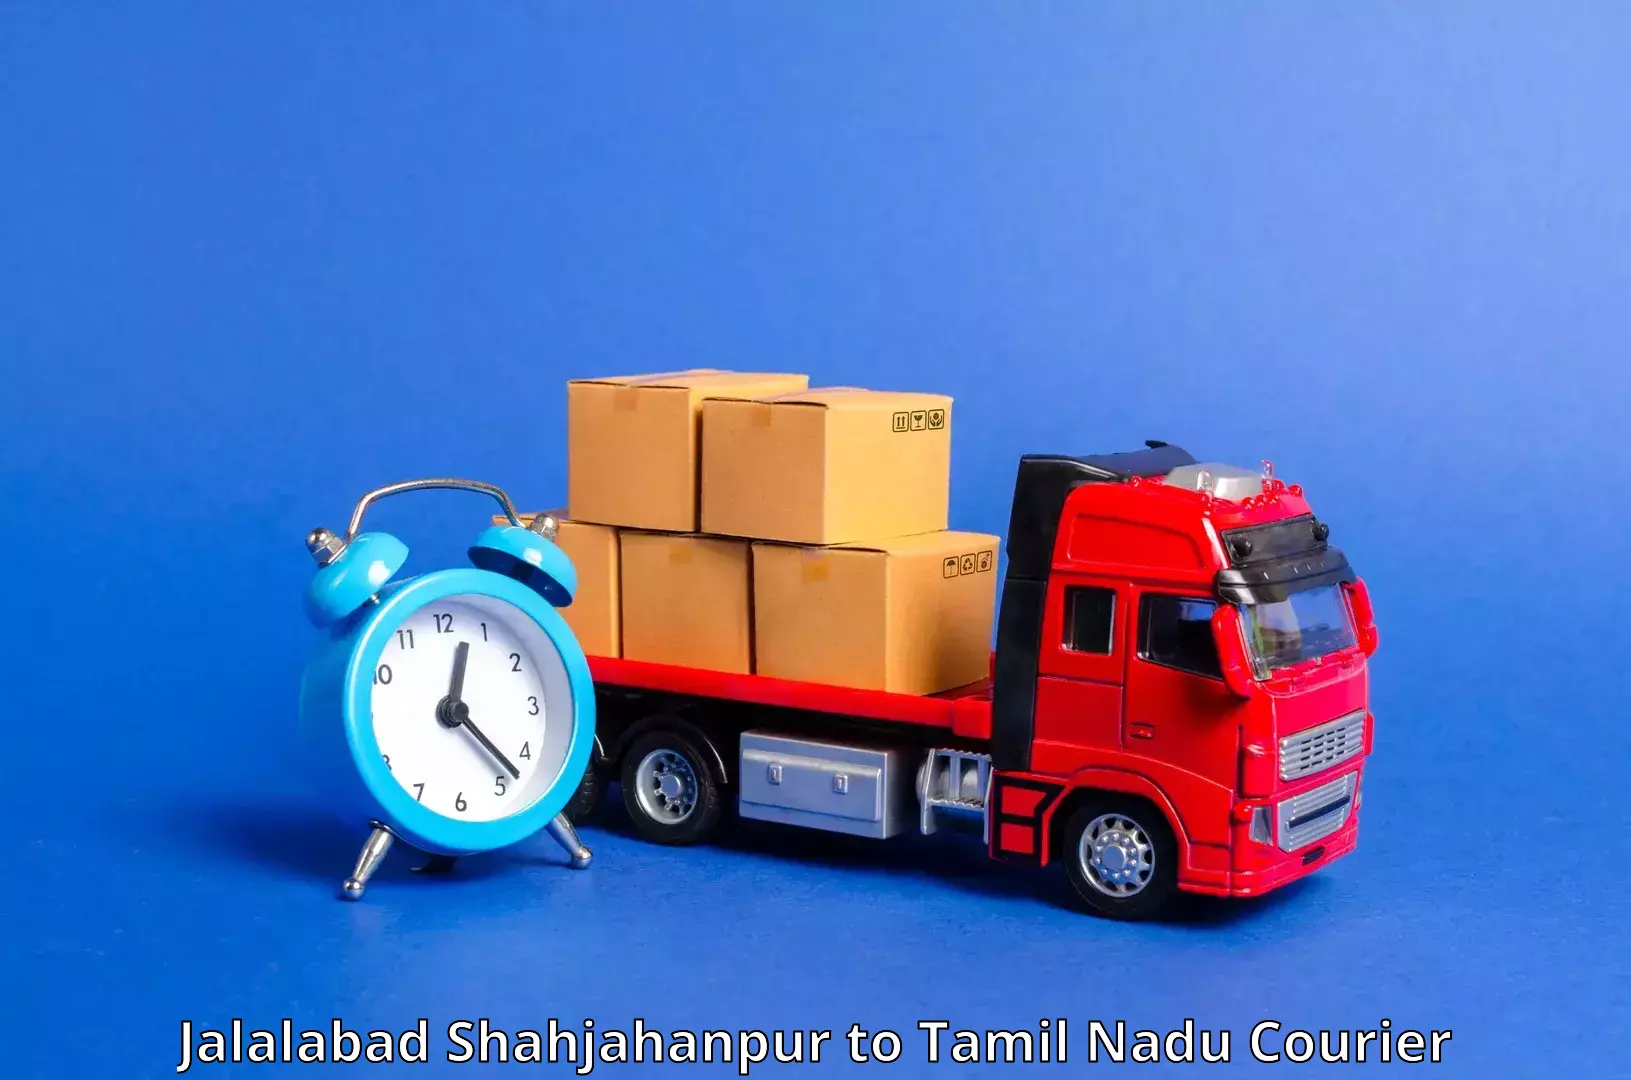 Reliable courier service Jalalabad Shahjahanpur to Sankari